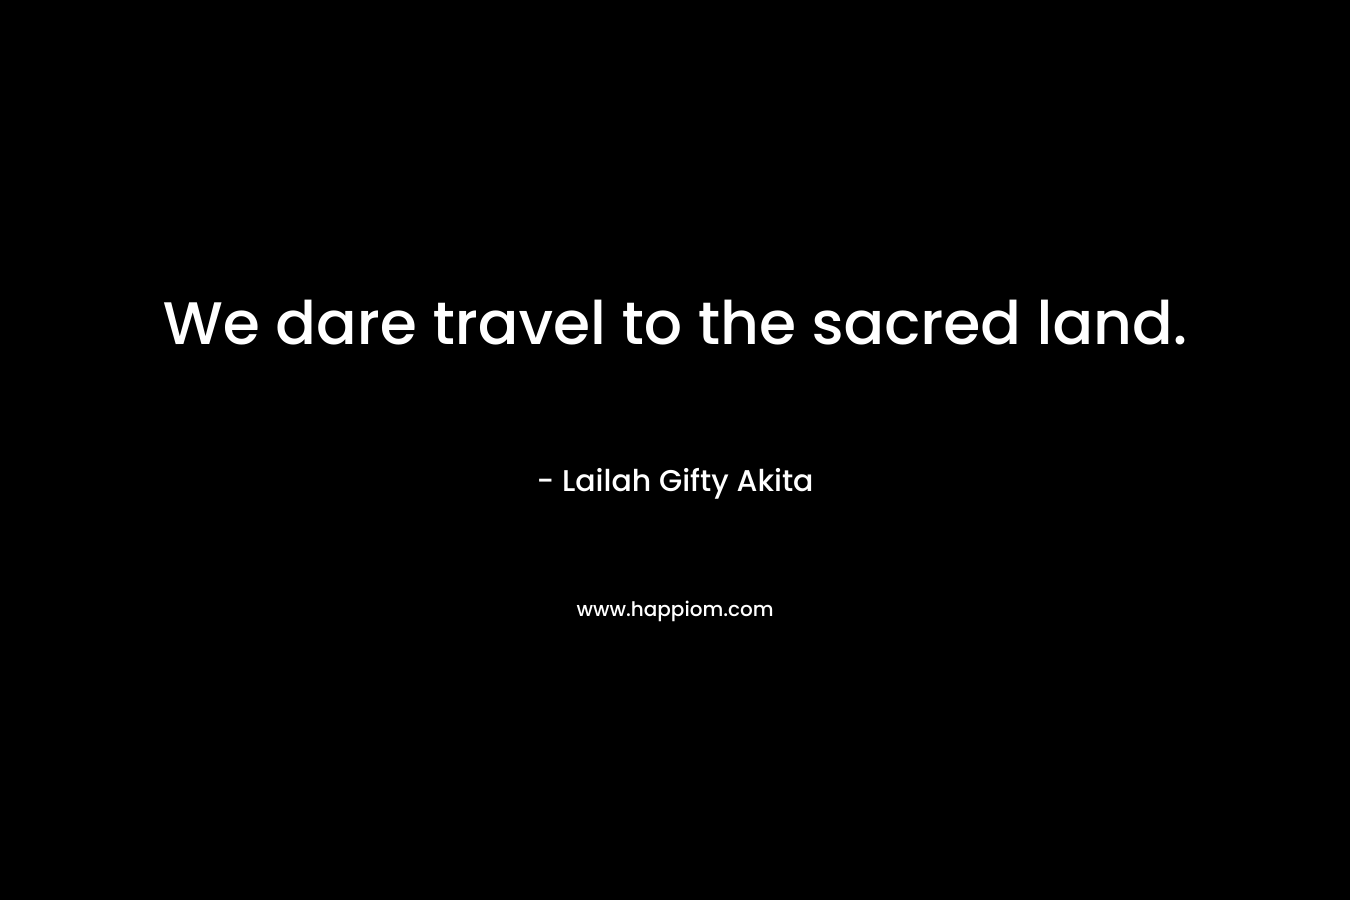 We dare travel to the sacred land.